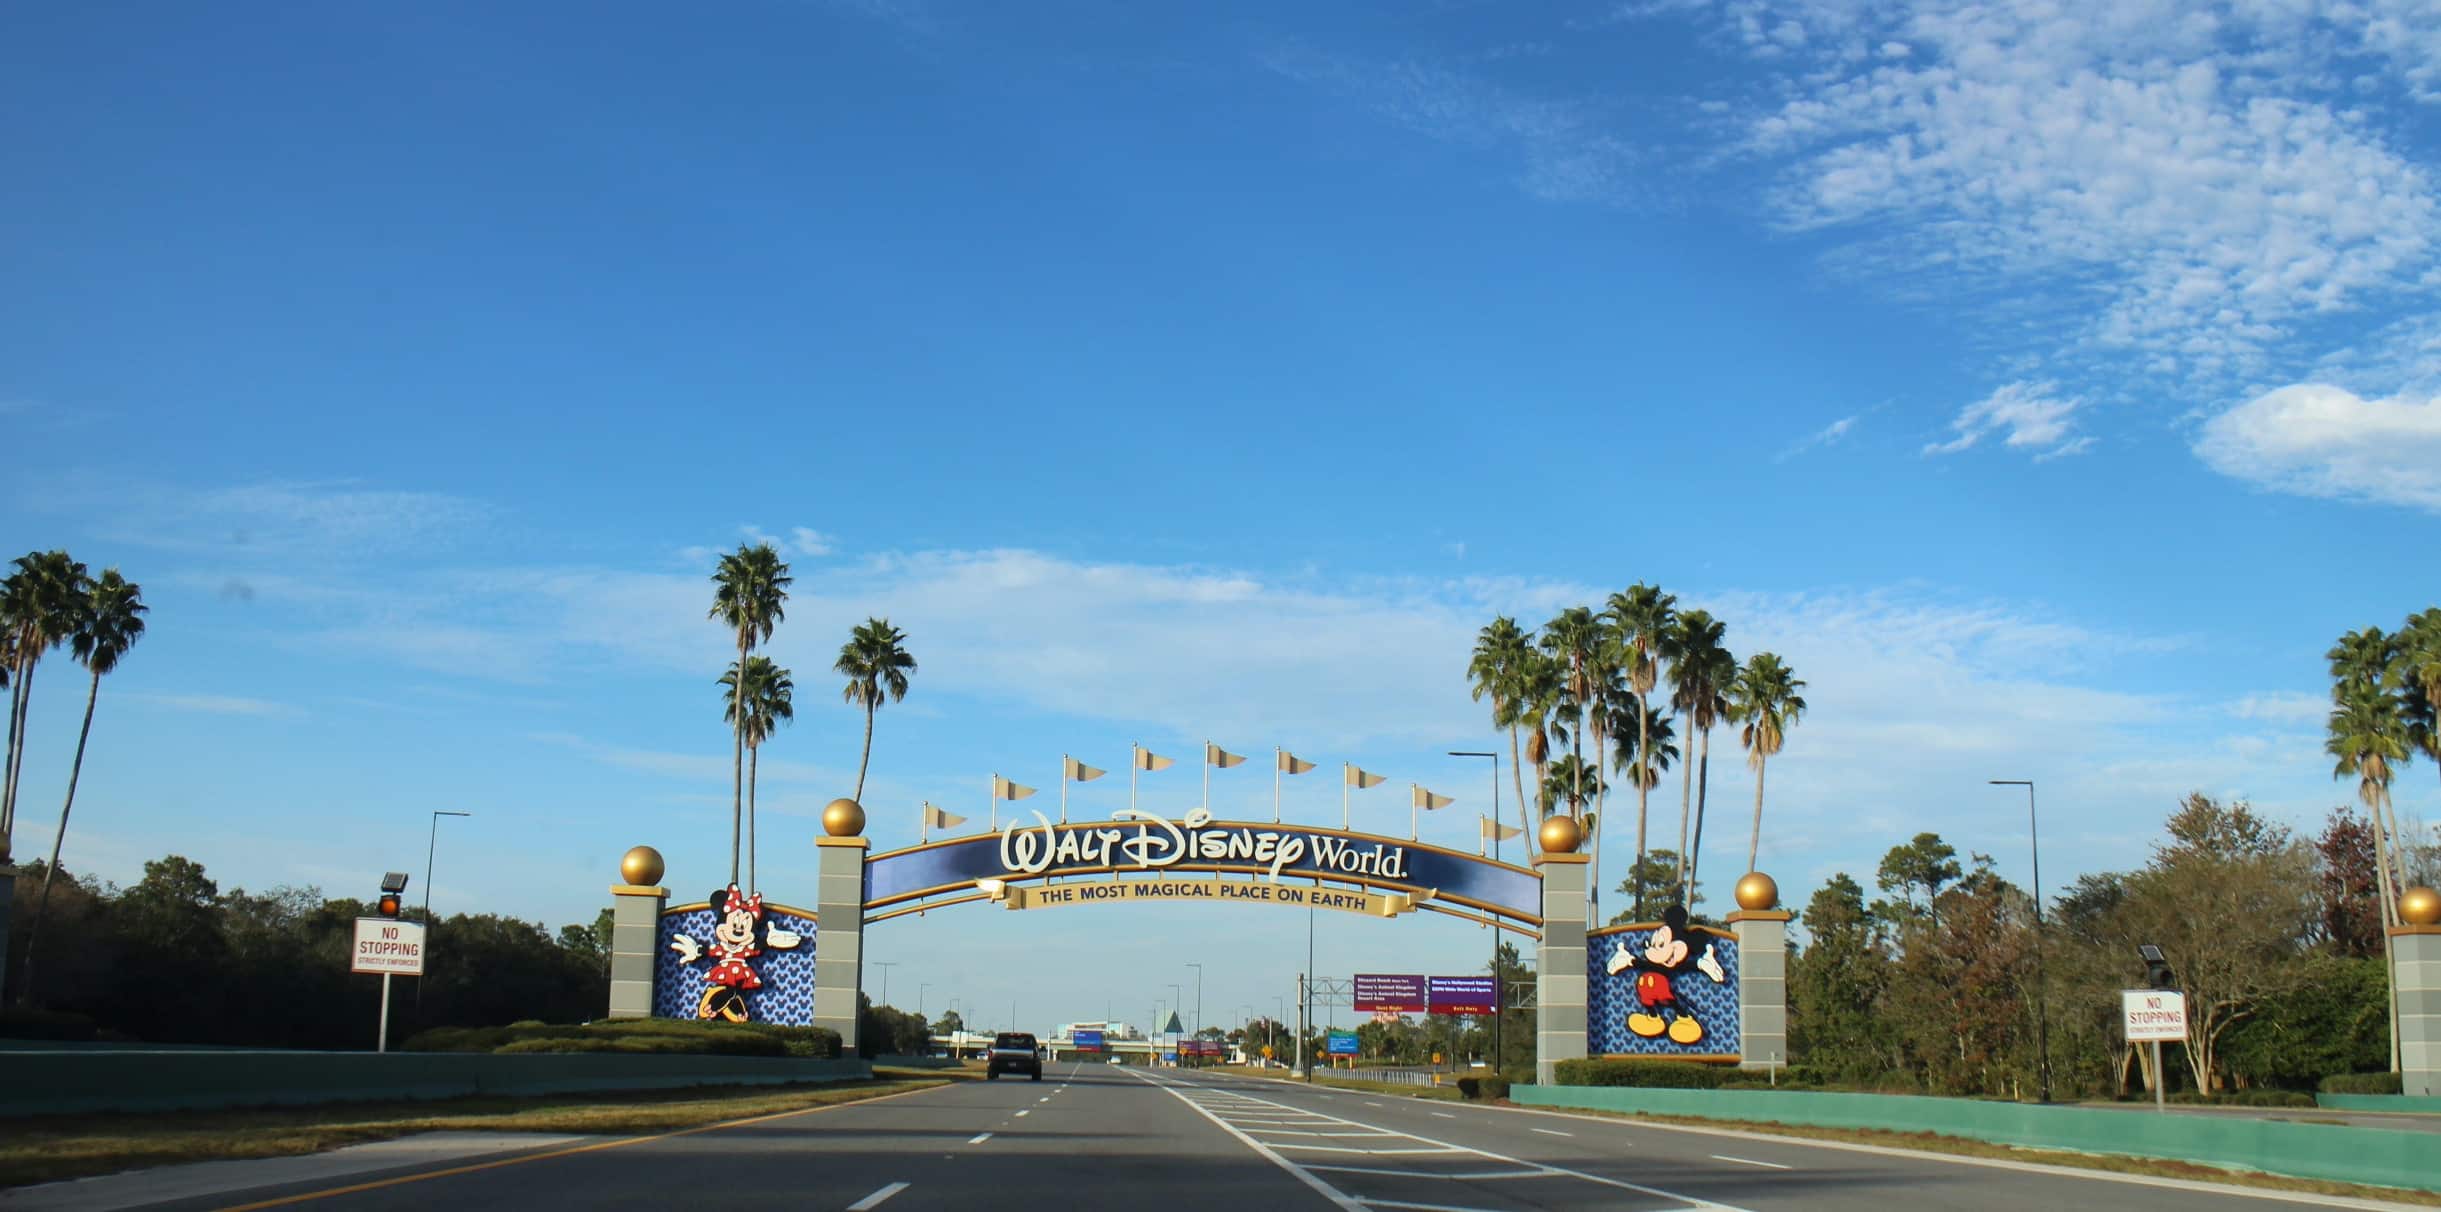 Disney World entrance gate with Mickey on the right and Minnie on the left.